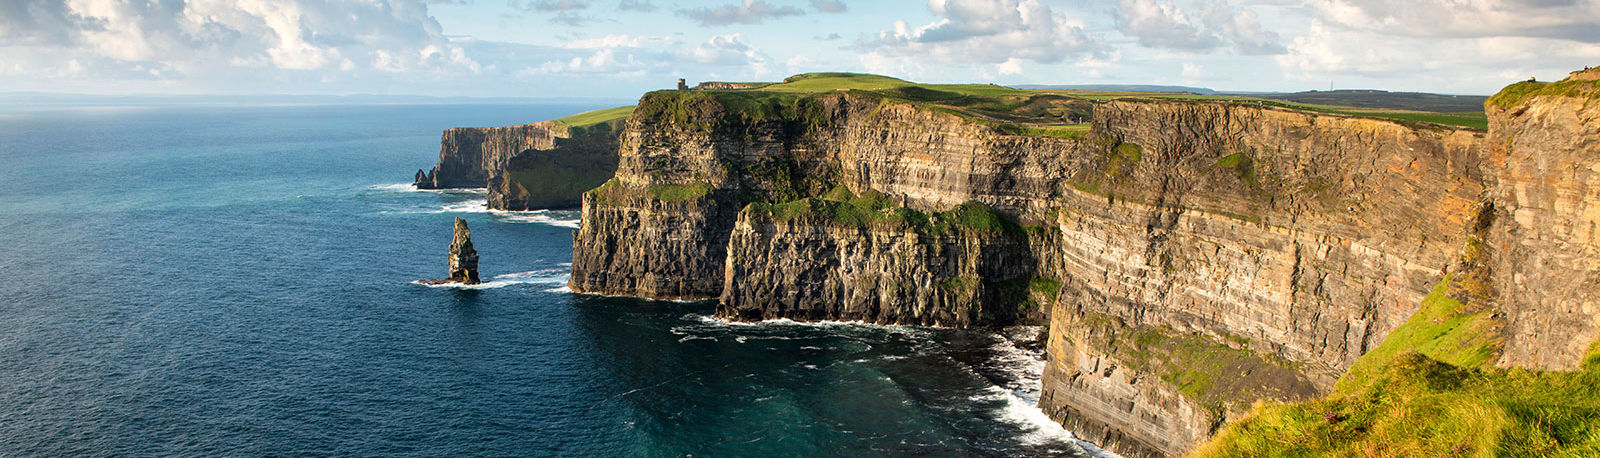 Cliffs of Moher © Christopher Hill Photographic 2014, Tourism Ireland